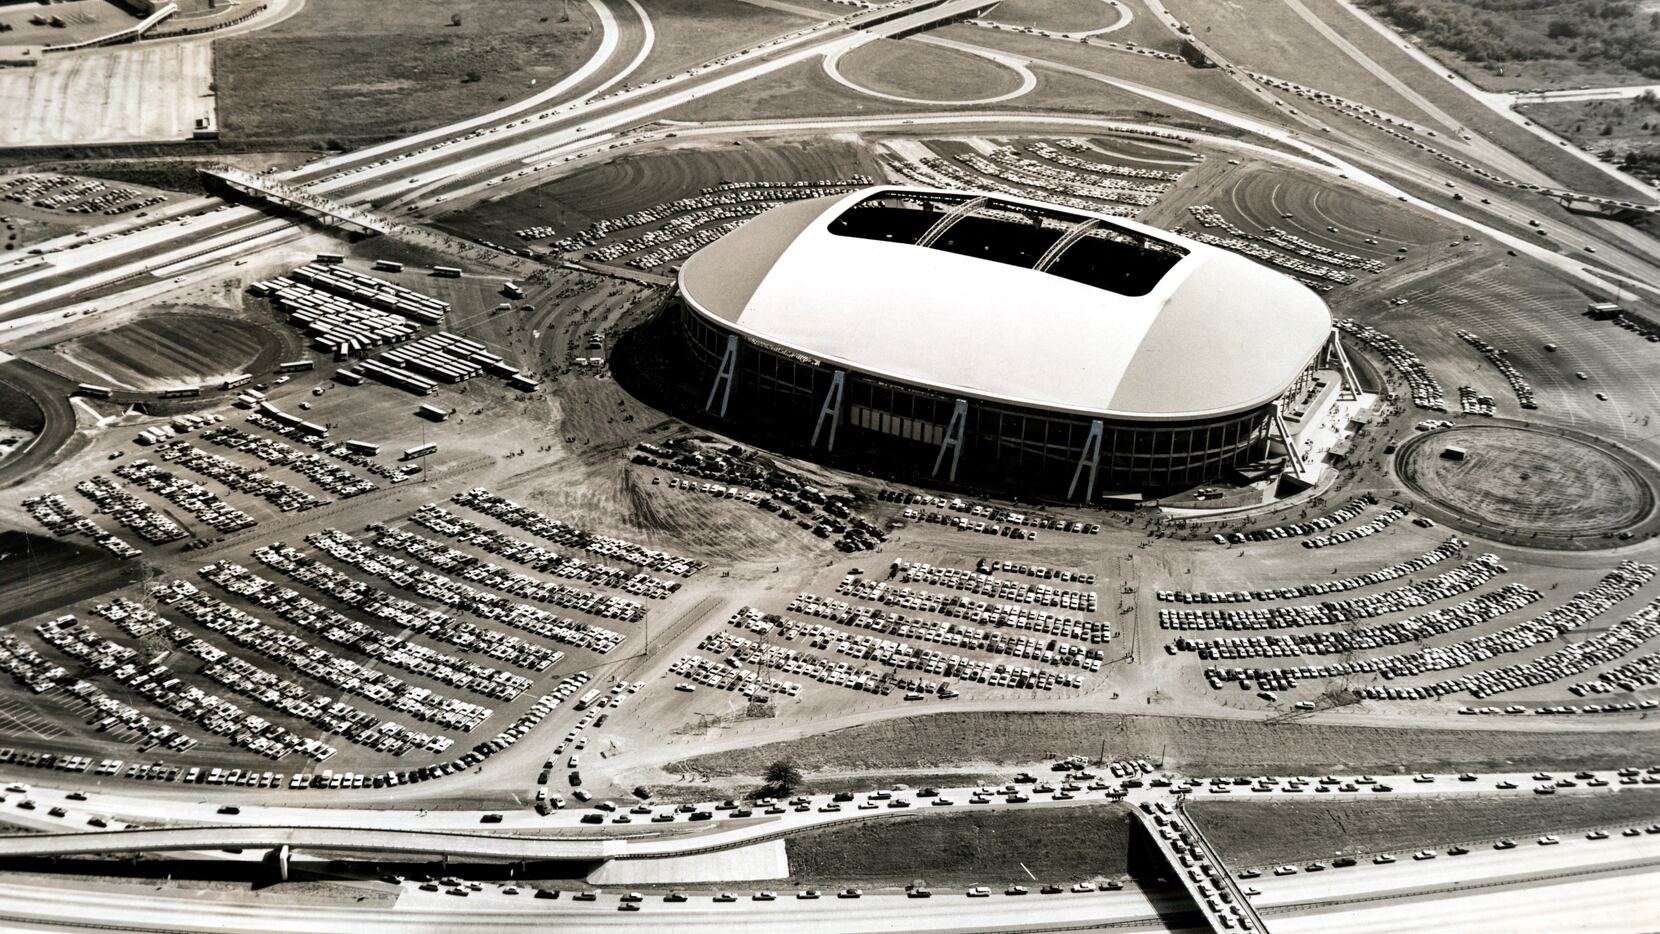 Texas Stadium opened 50 years ago. Let's take a look back at the